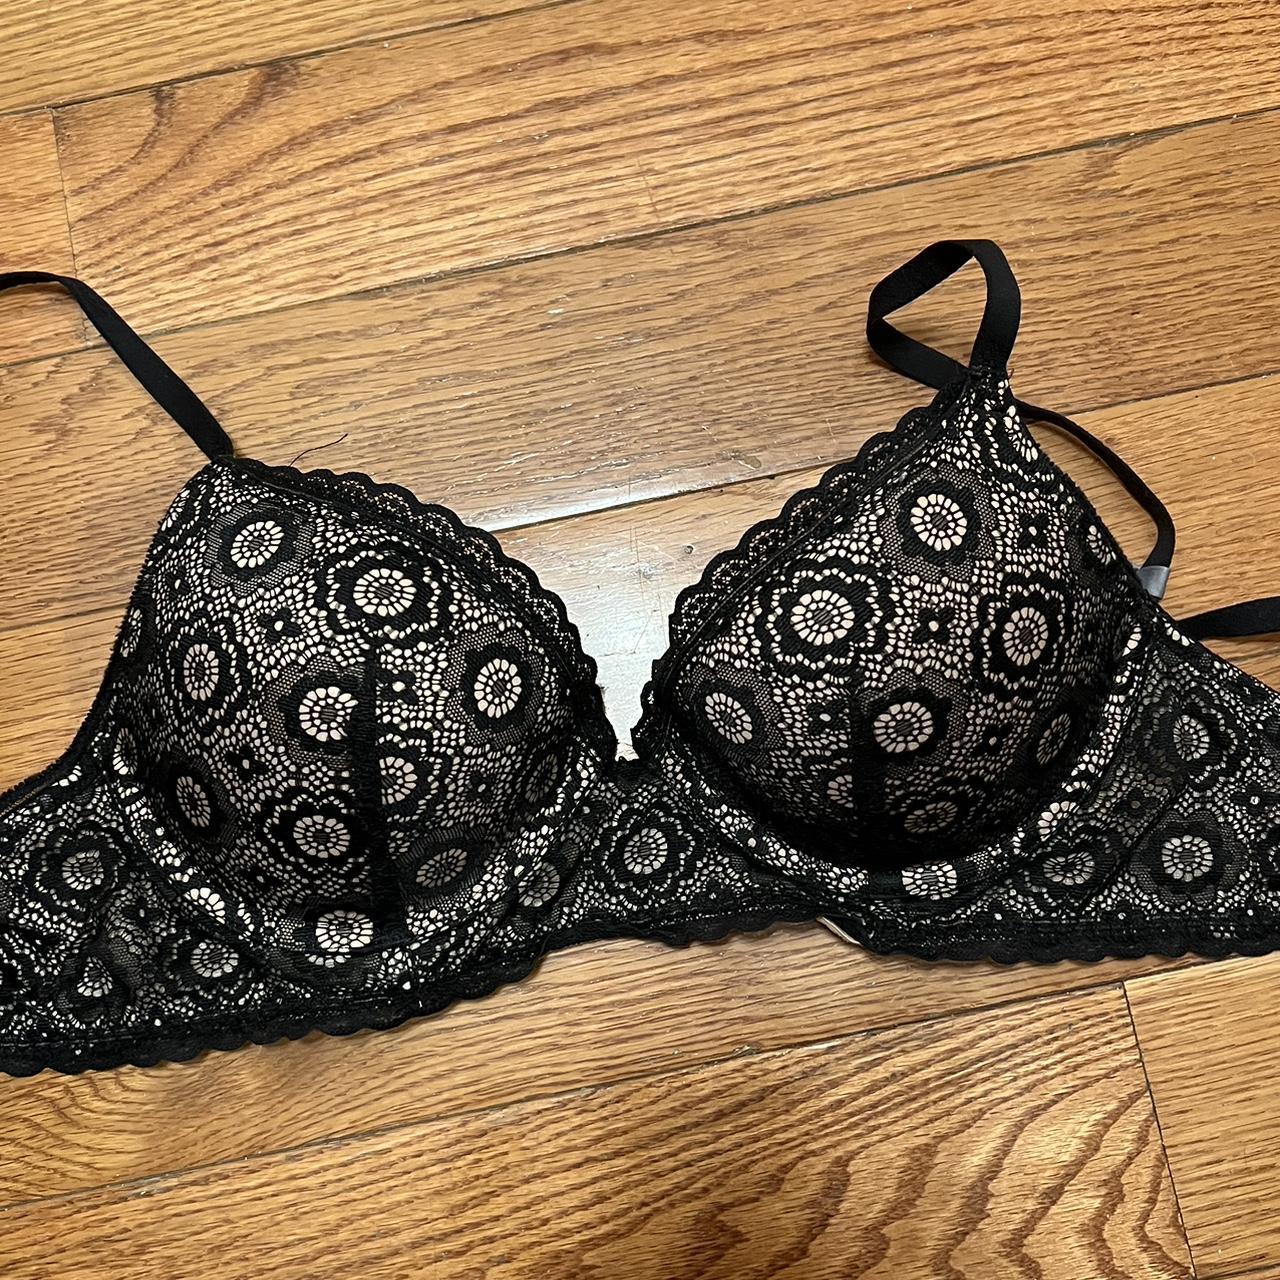 aerie forest green push up bra with lace band, 32c - Depop